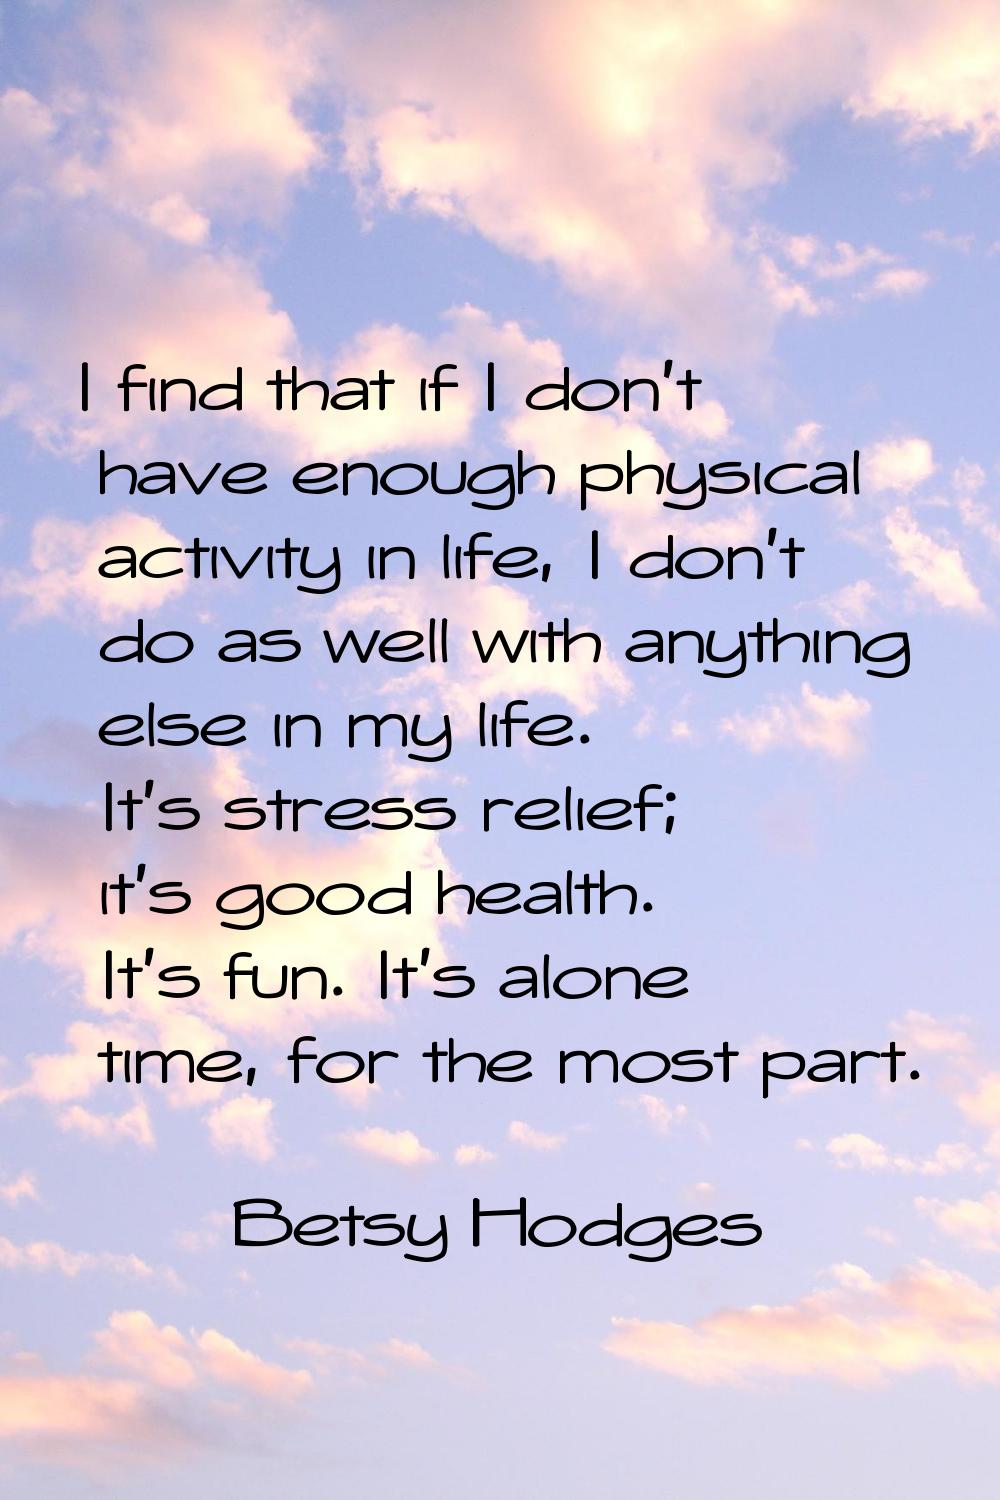 I find that if I don't have enough physical activity in life, I don't do as well with anything else